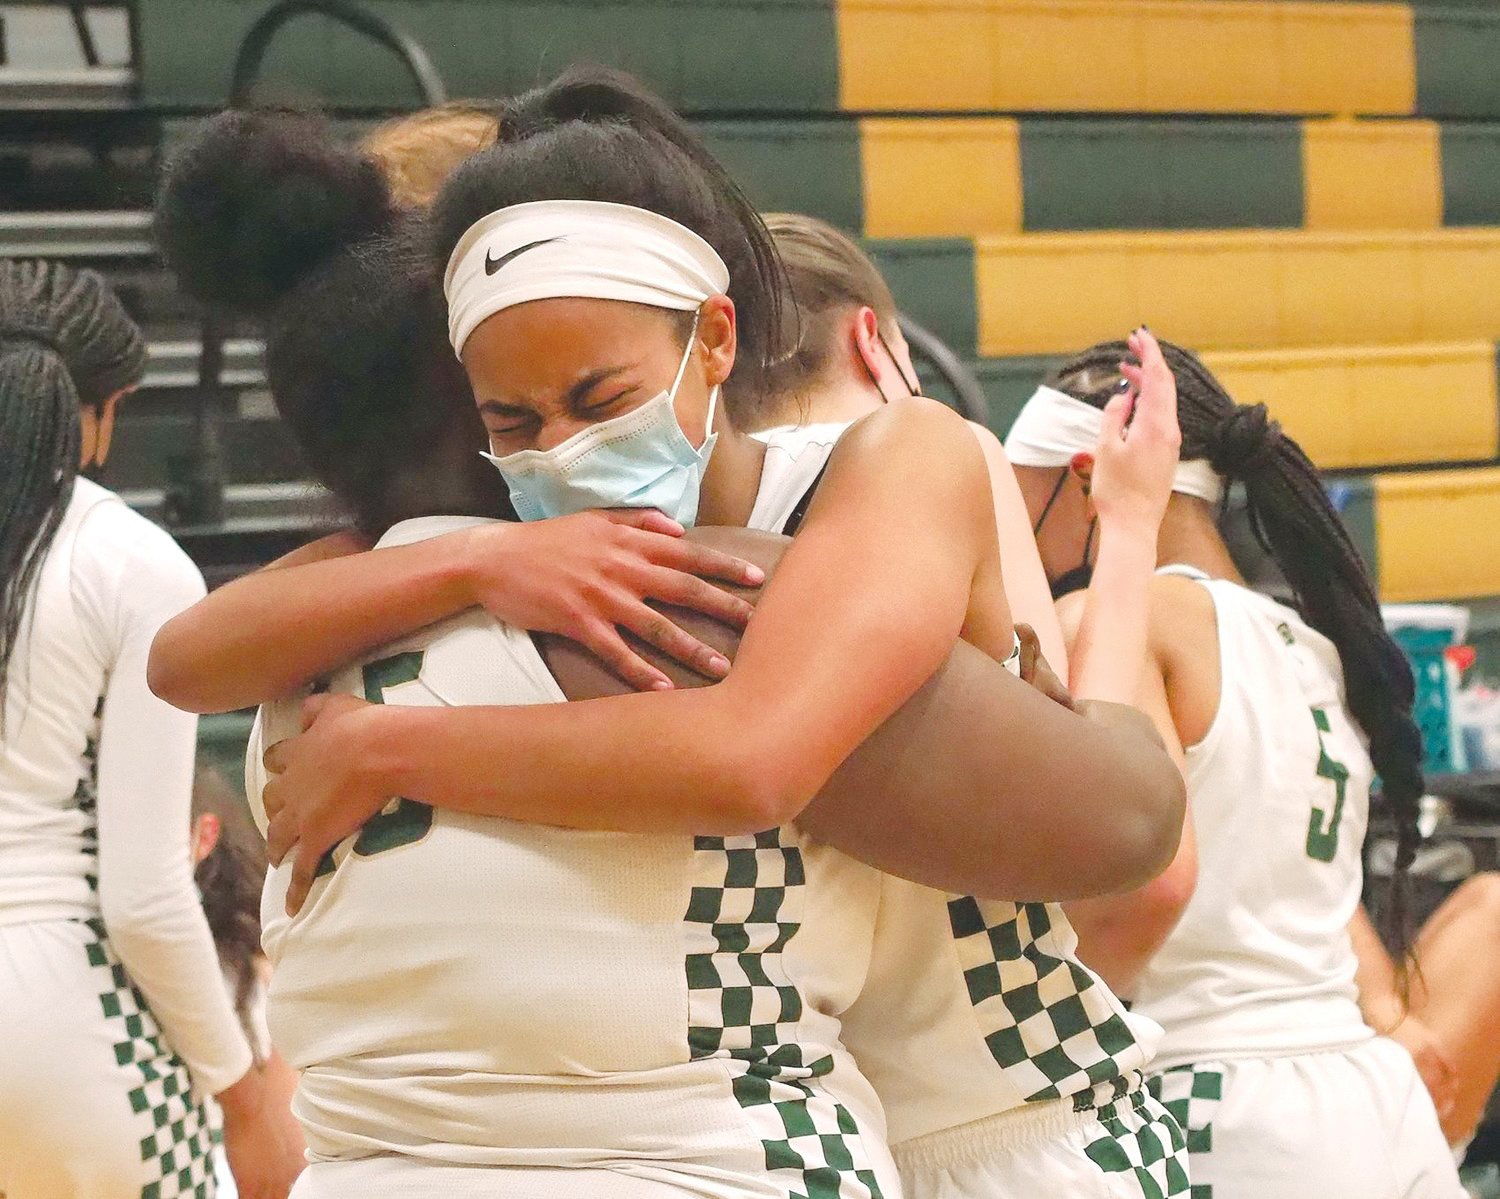 Northwood senior guard Rae McClarty emotionally embraces her teammate and fellow senior Jamaria Faucette (45) after the Chargers' 58-51 first-round playoff win over E.E. Smith, 58-51, on Feb. 23.